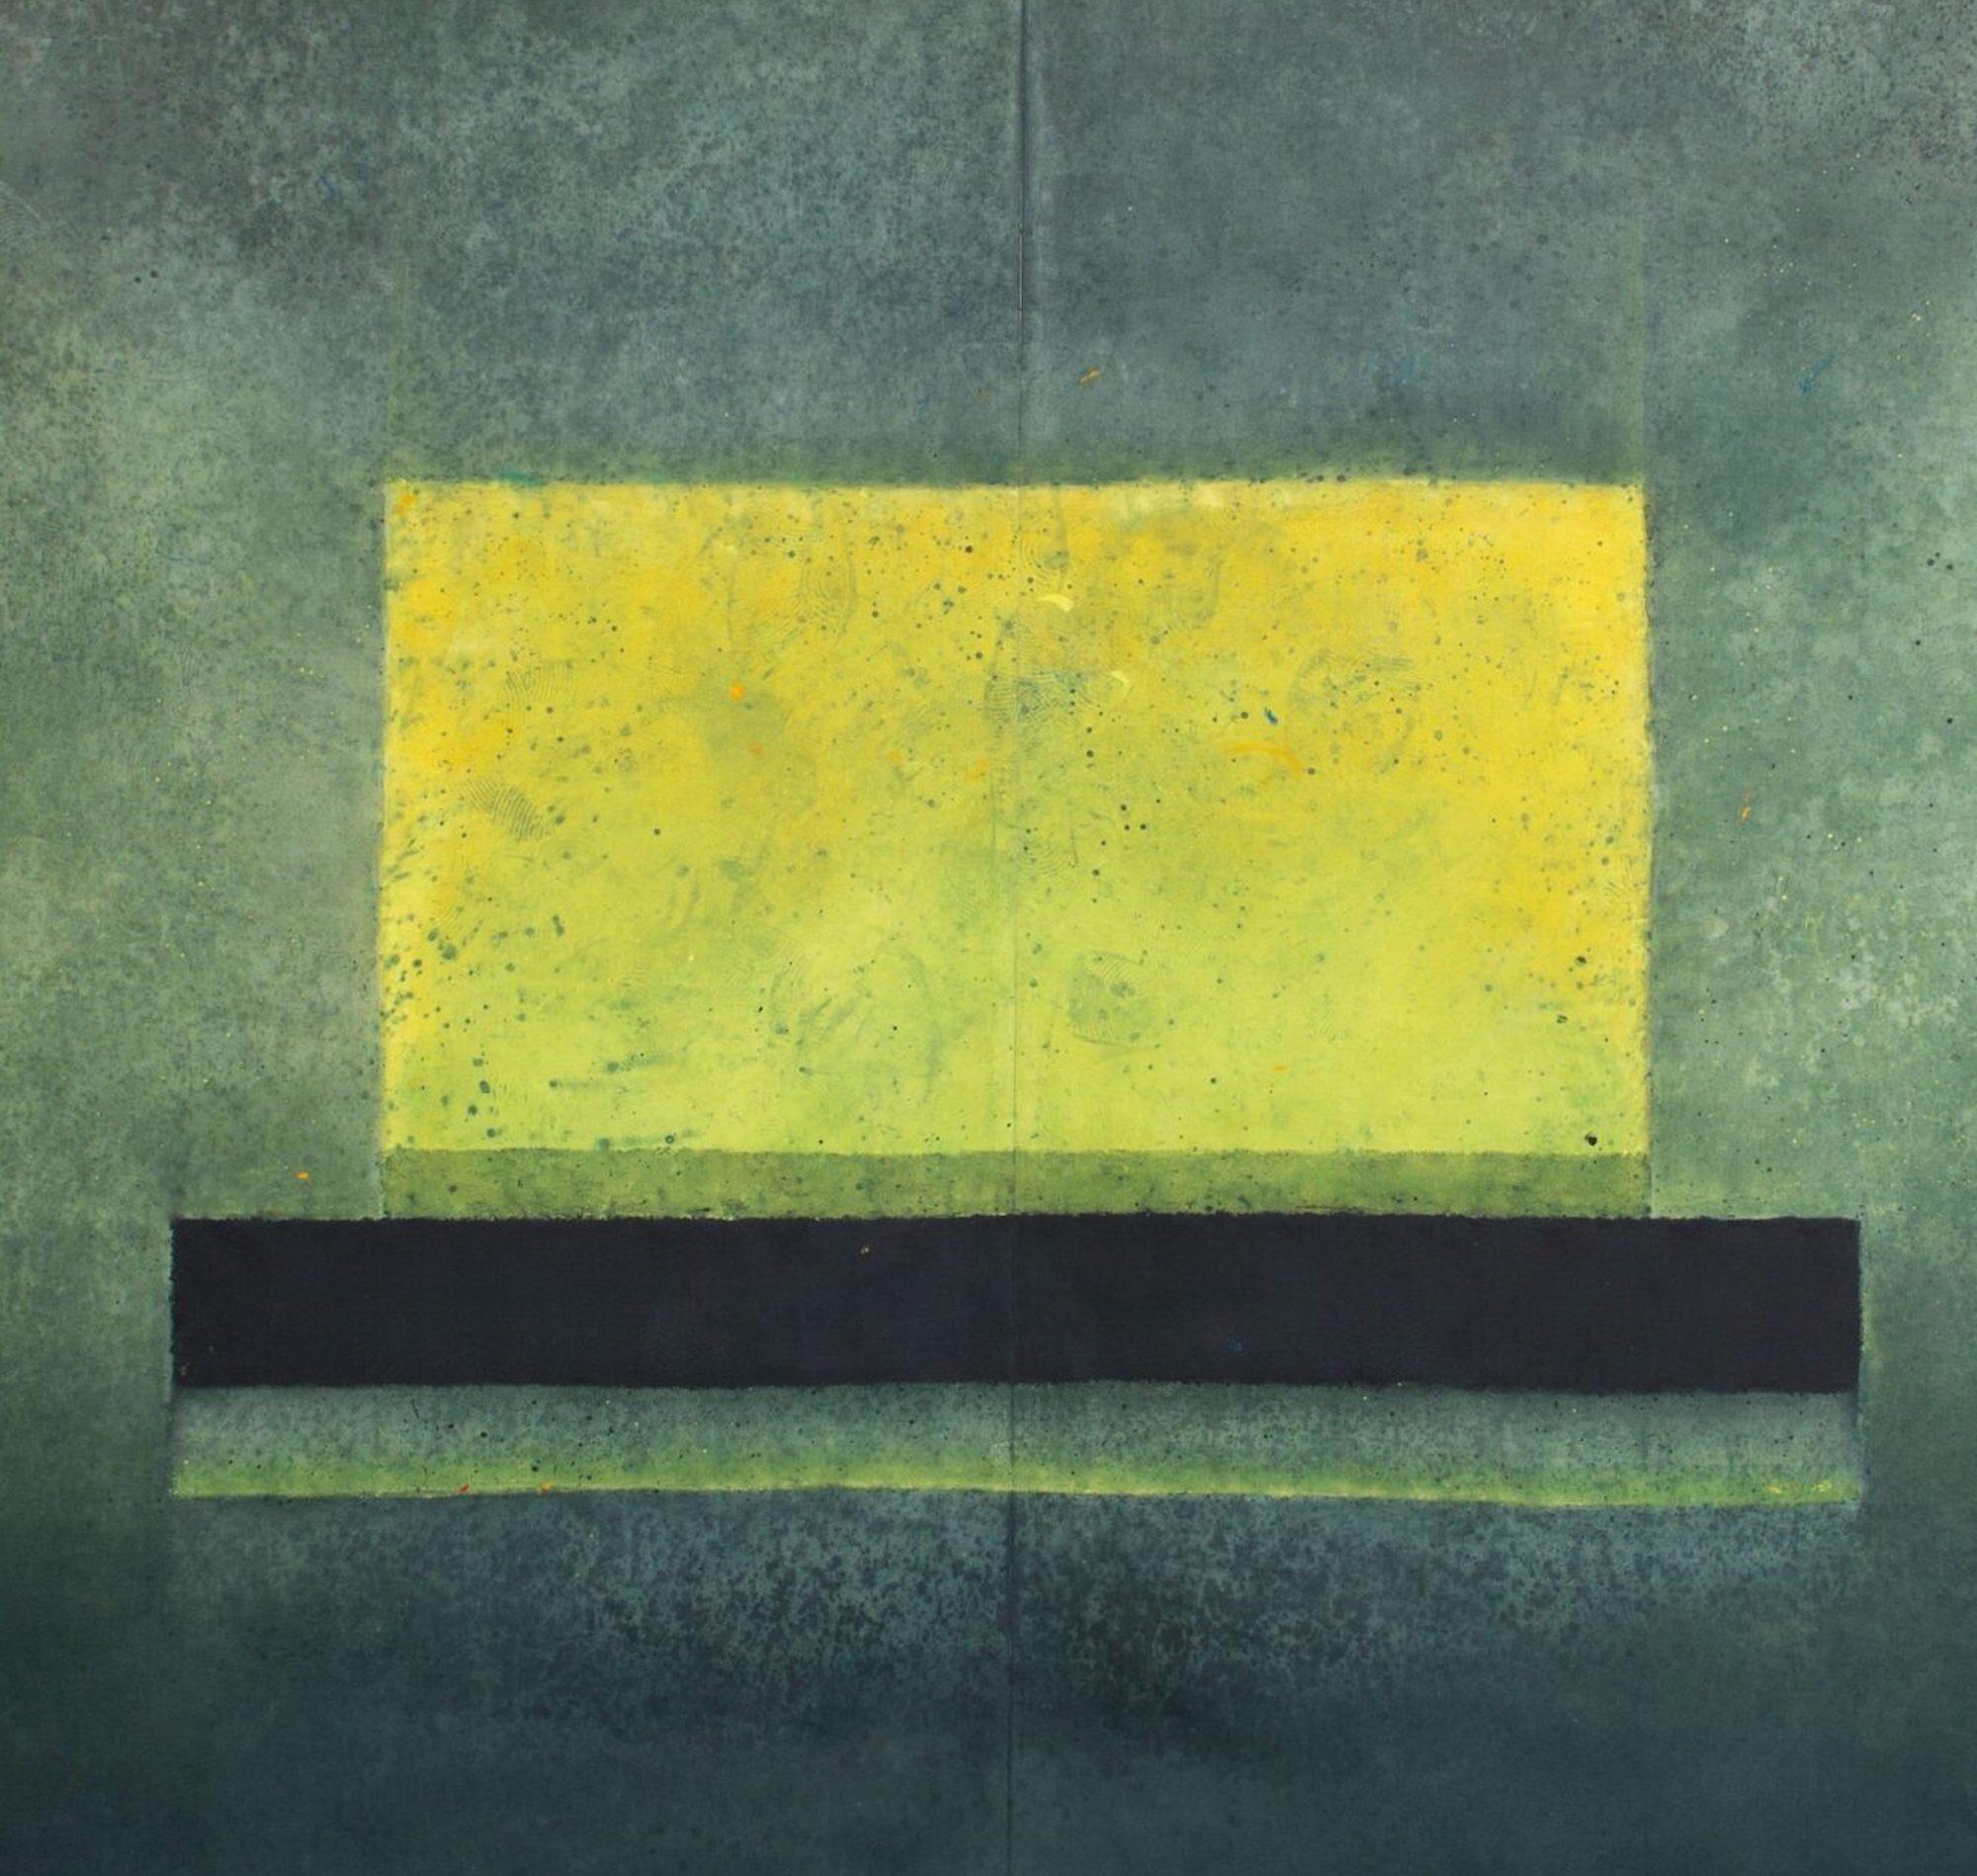 Untitled XXV by Ferle - Large abstract painting, green tones, spiritual, yellow - Abstract Painting by Elvire Ferle